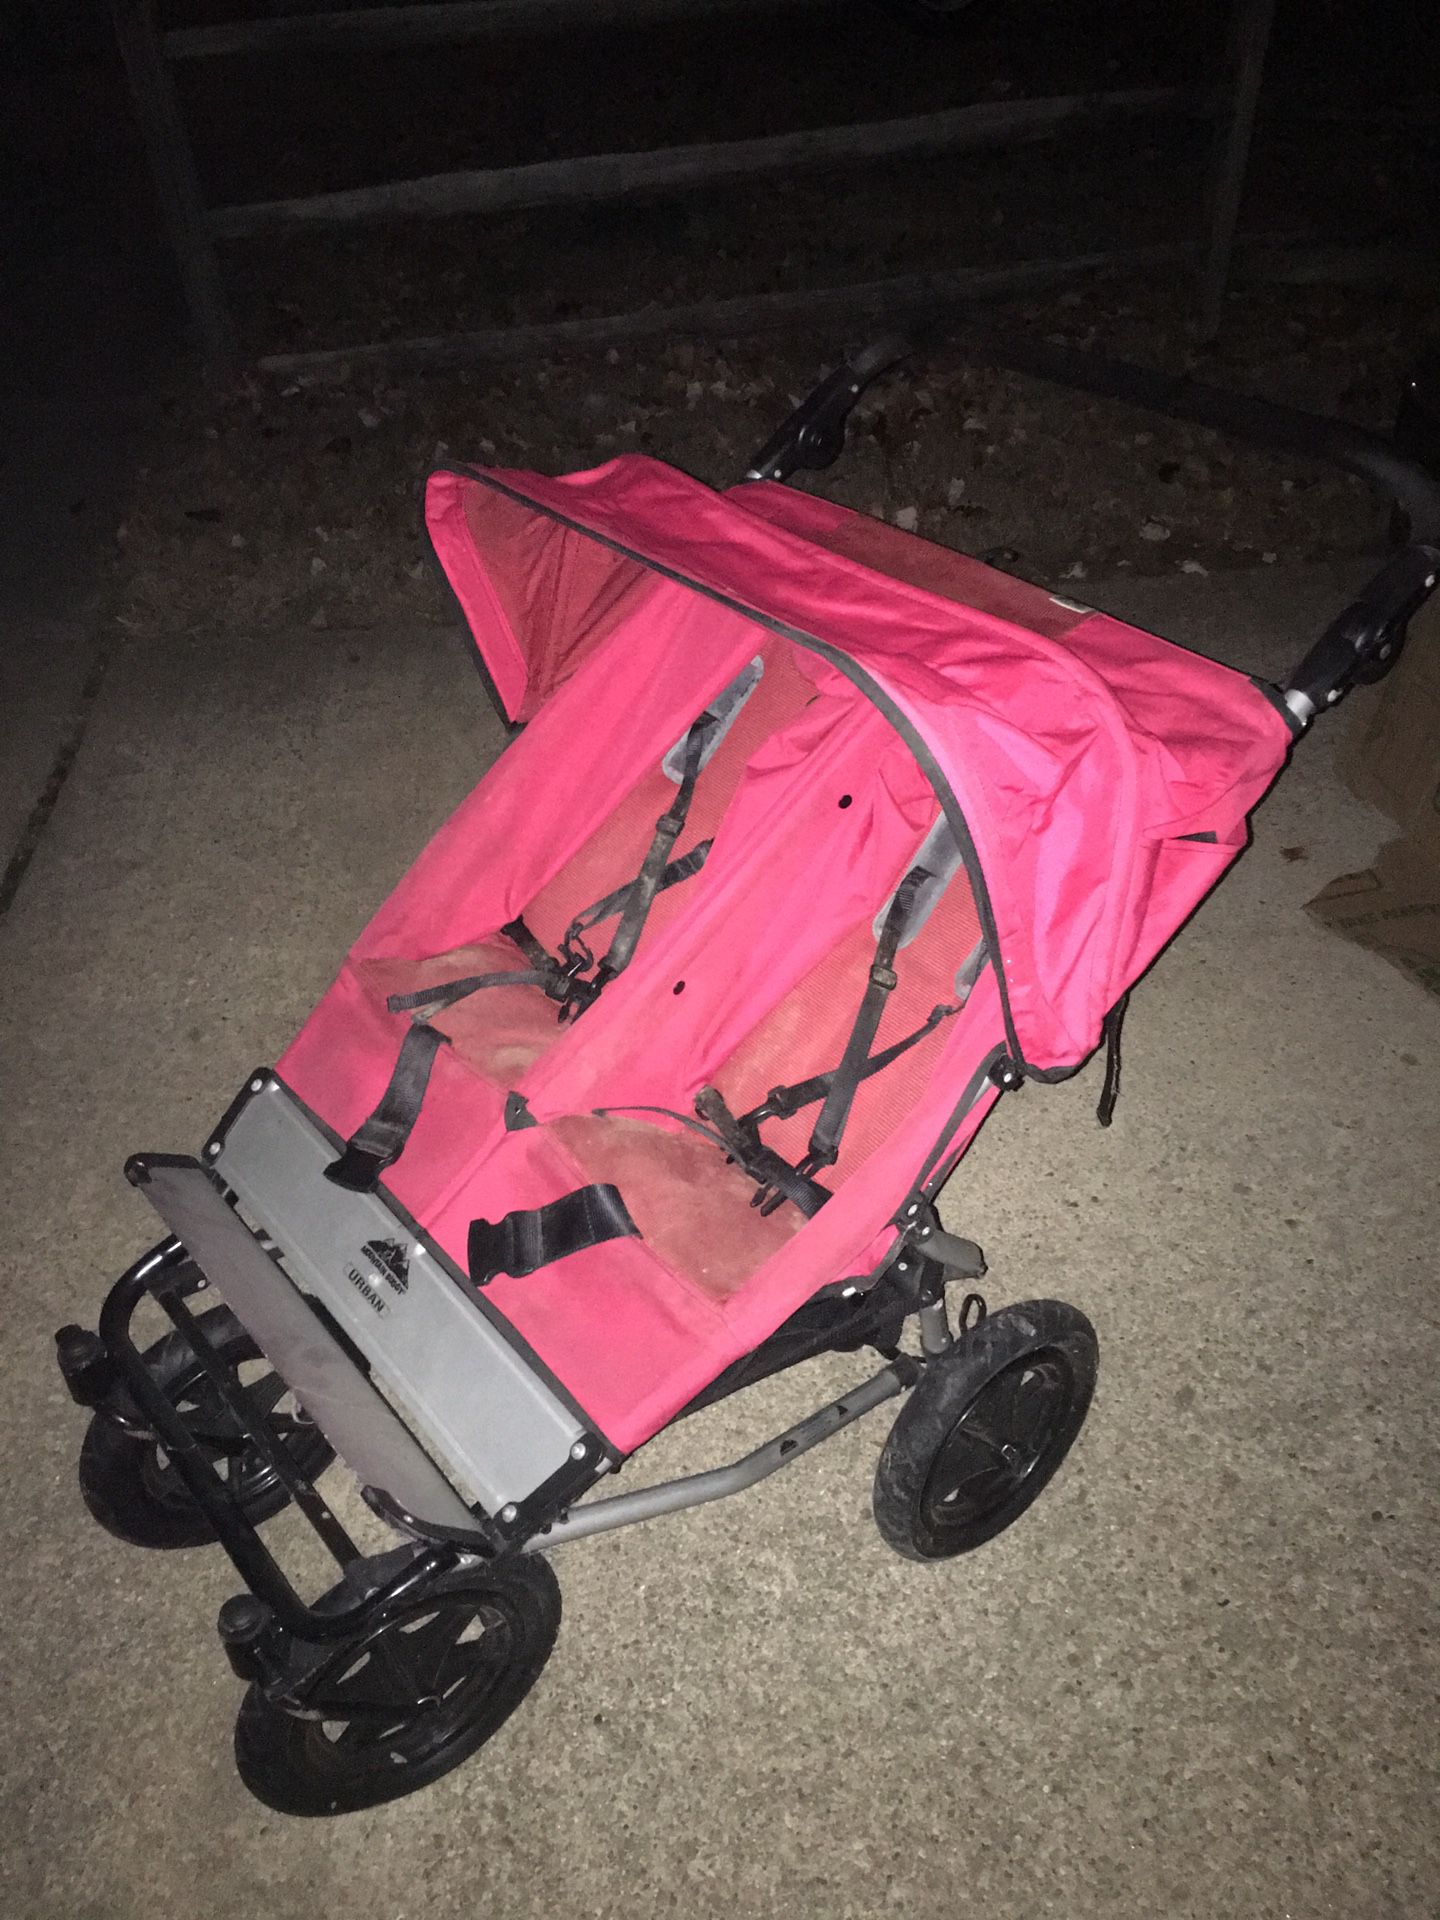 This is the top-of-the-line mountain buggy double stroller only 100 firm